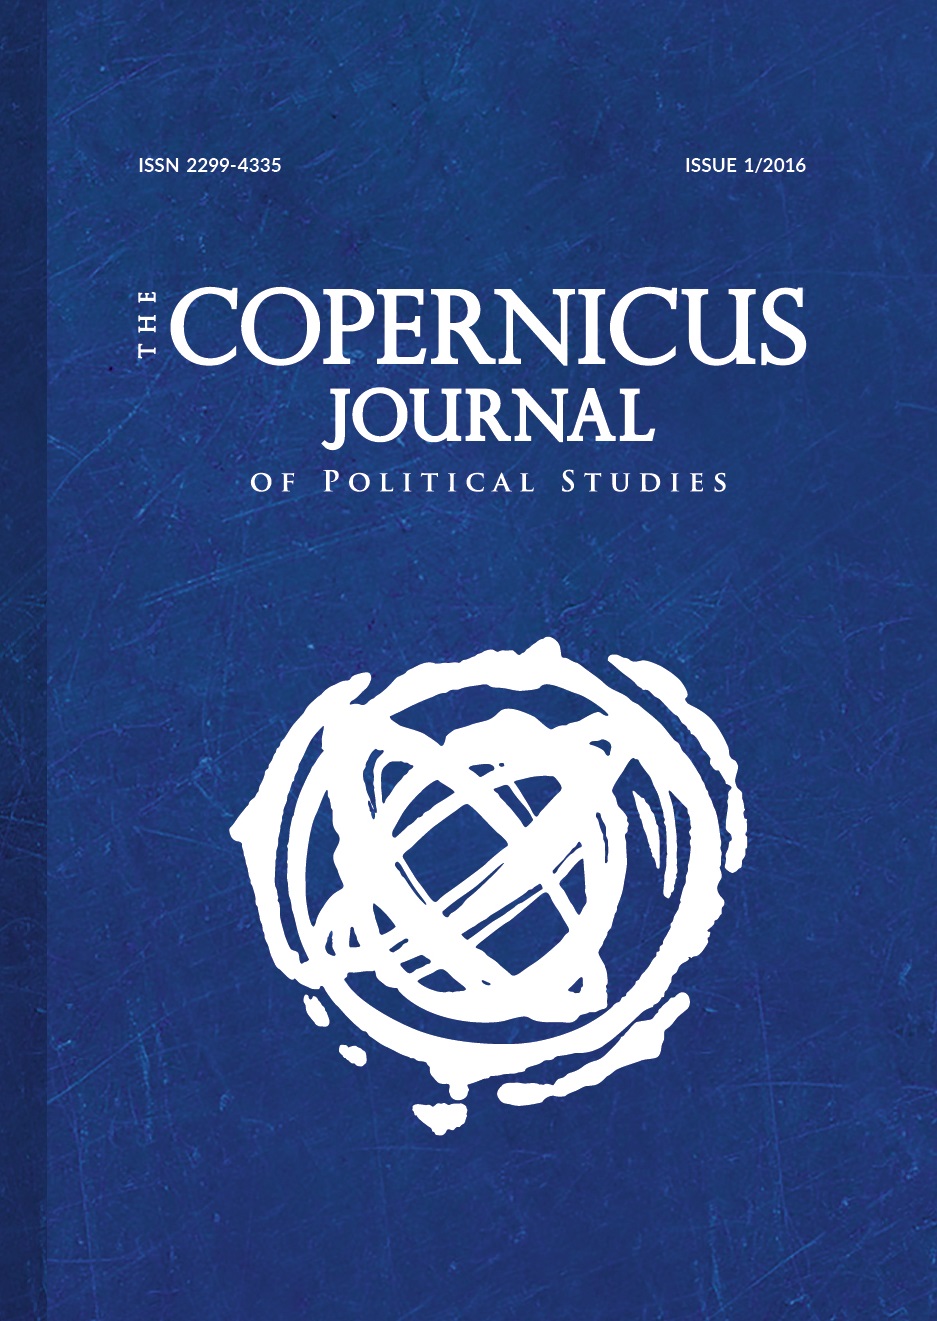 The Copernicus Journal of Political Studies